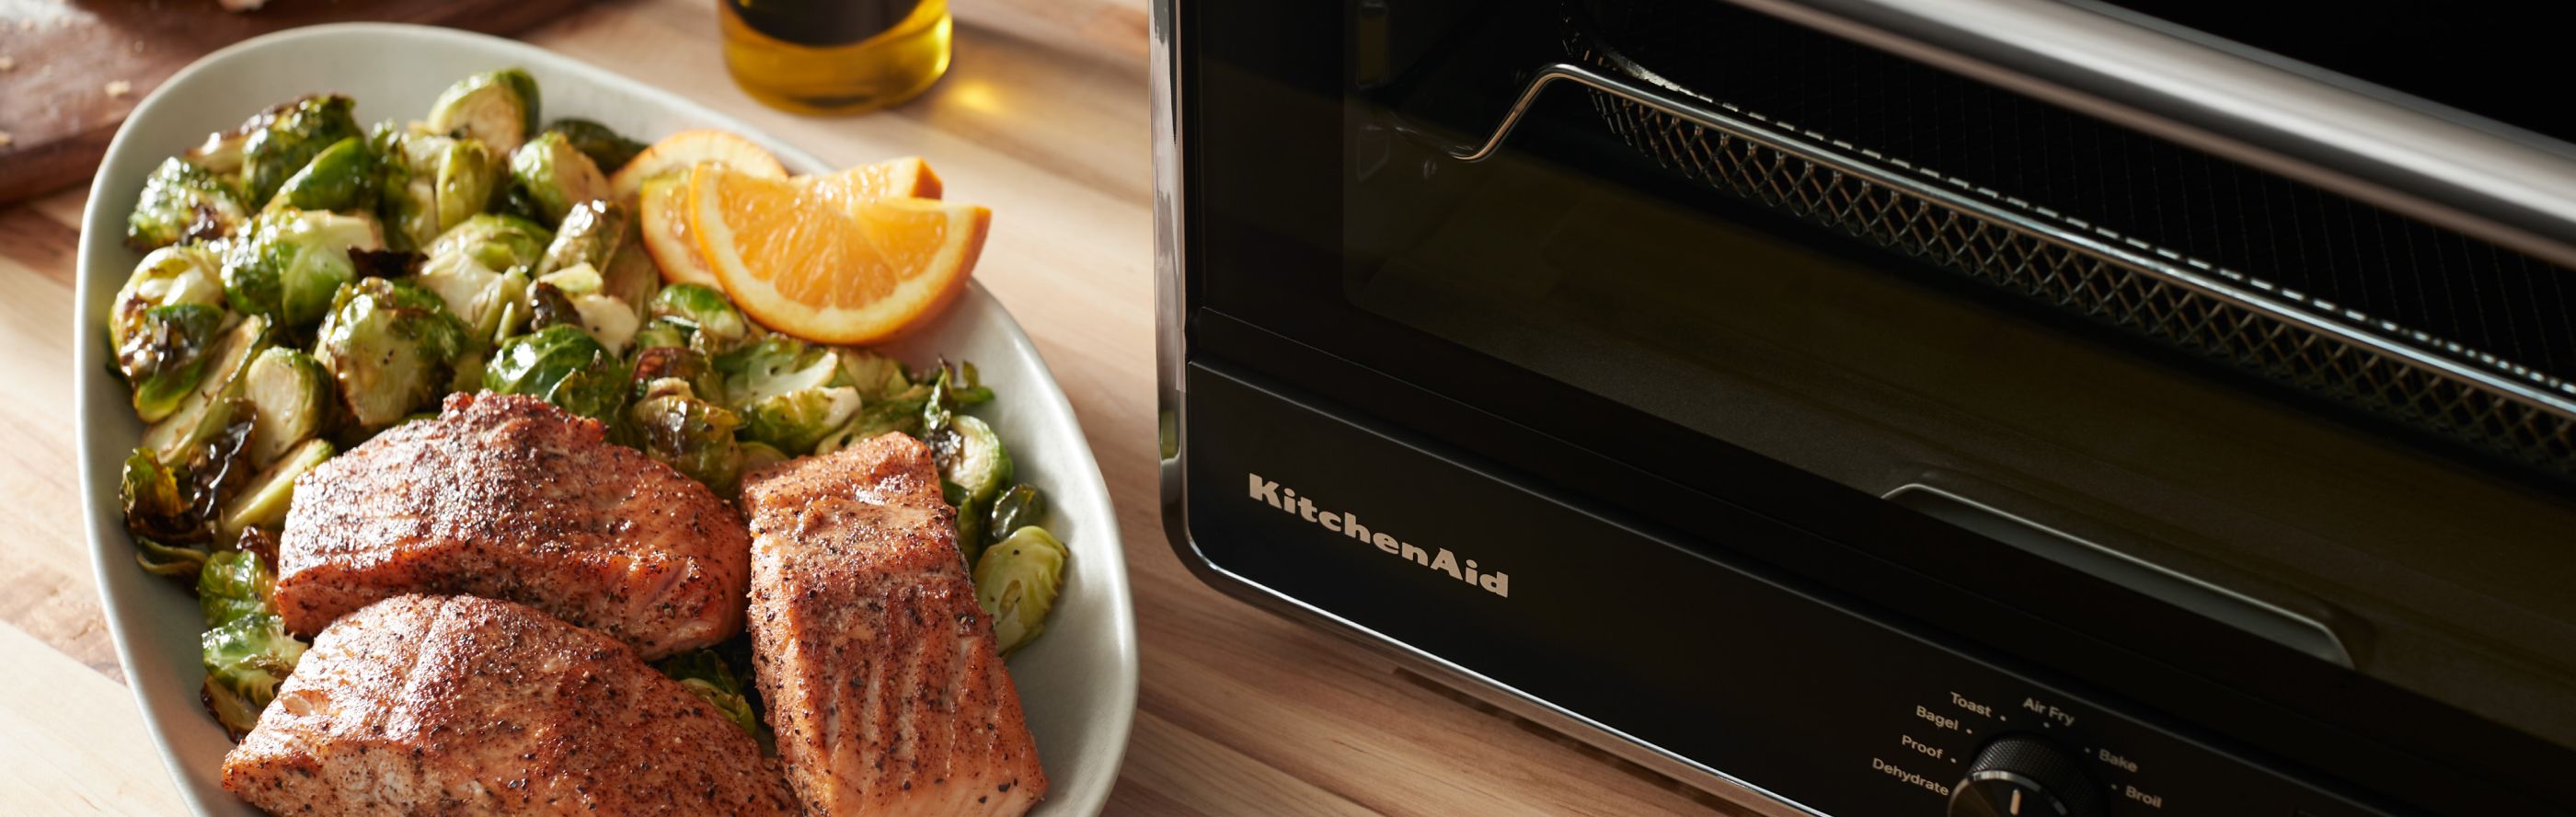 Air fryer salmon in a serving dish with Brussel sprouts next to a KitchenAid® countertop oven with air fry.